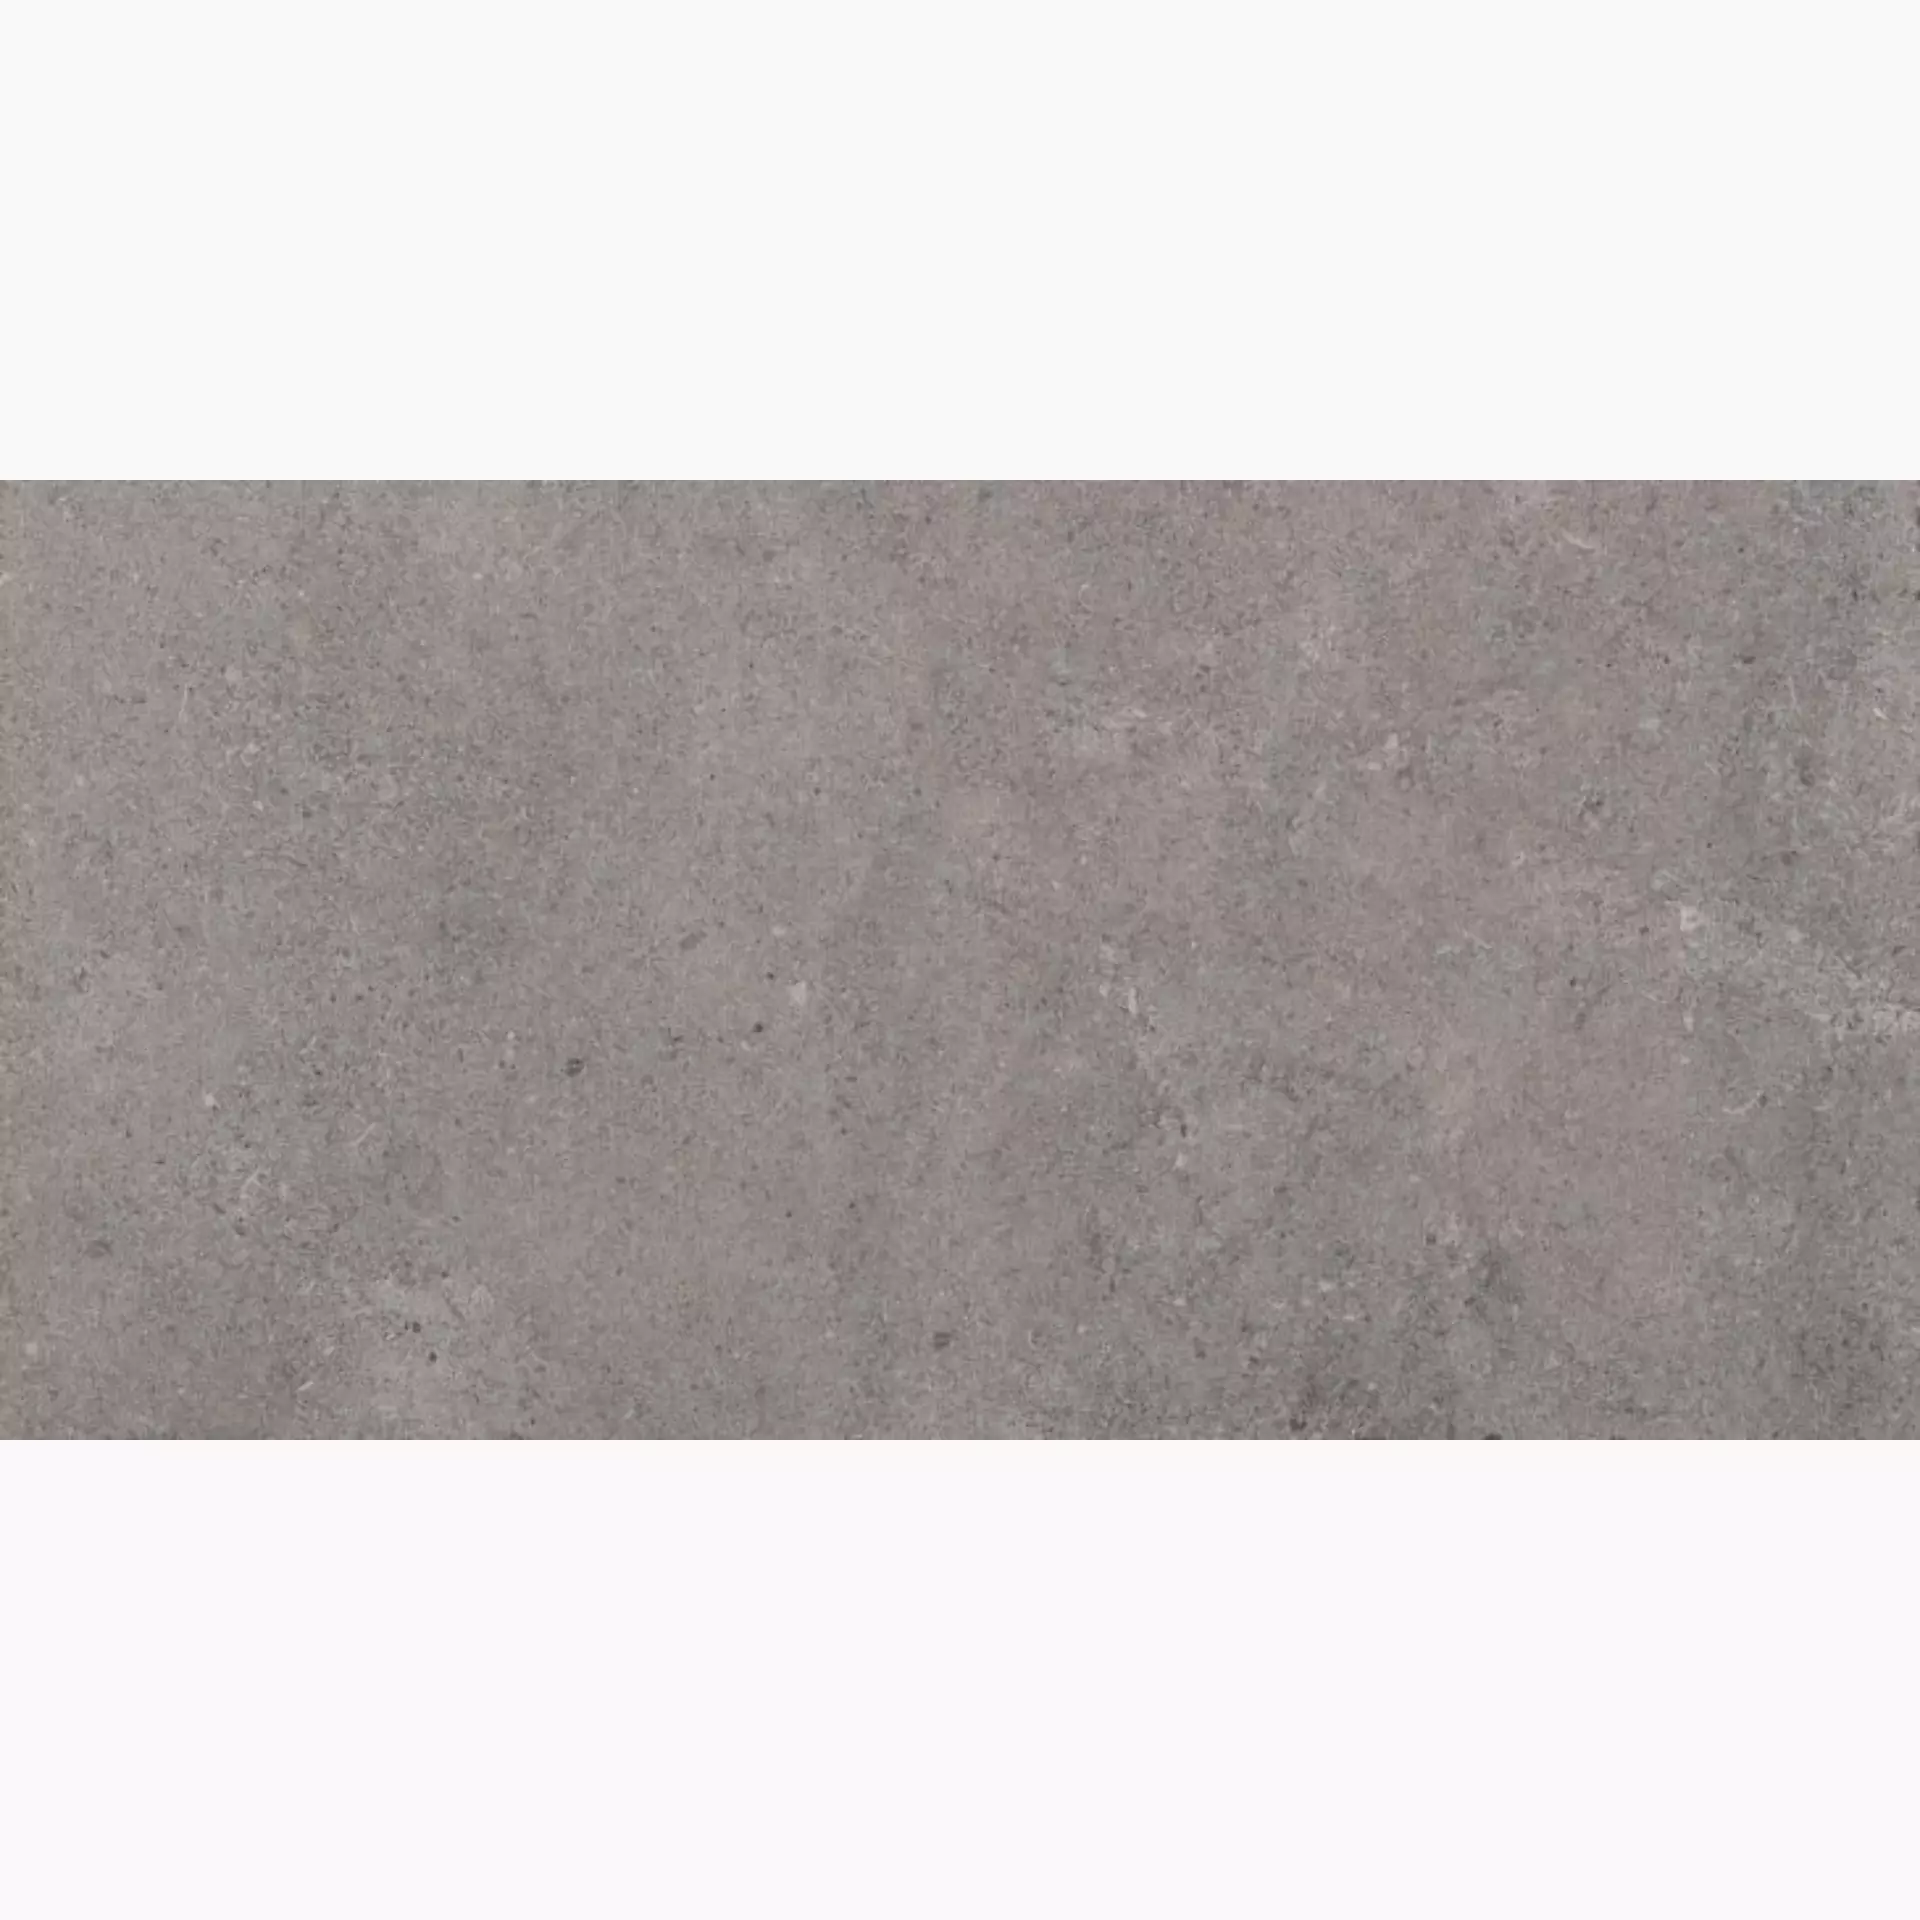 Sant Agostino Highstone Grey Natural CSAHS7GY12 60x120cm rectified 10mm